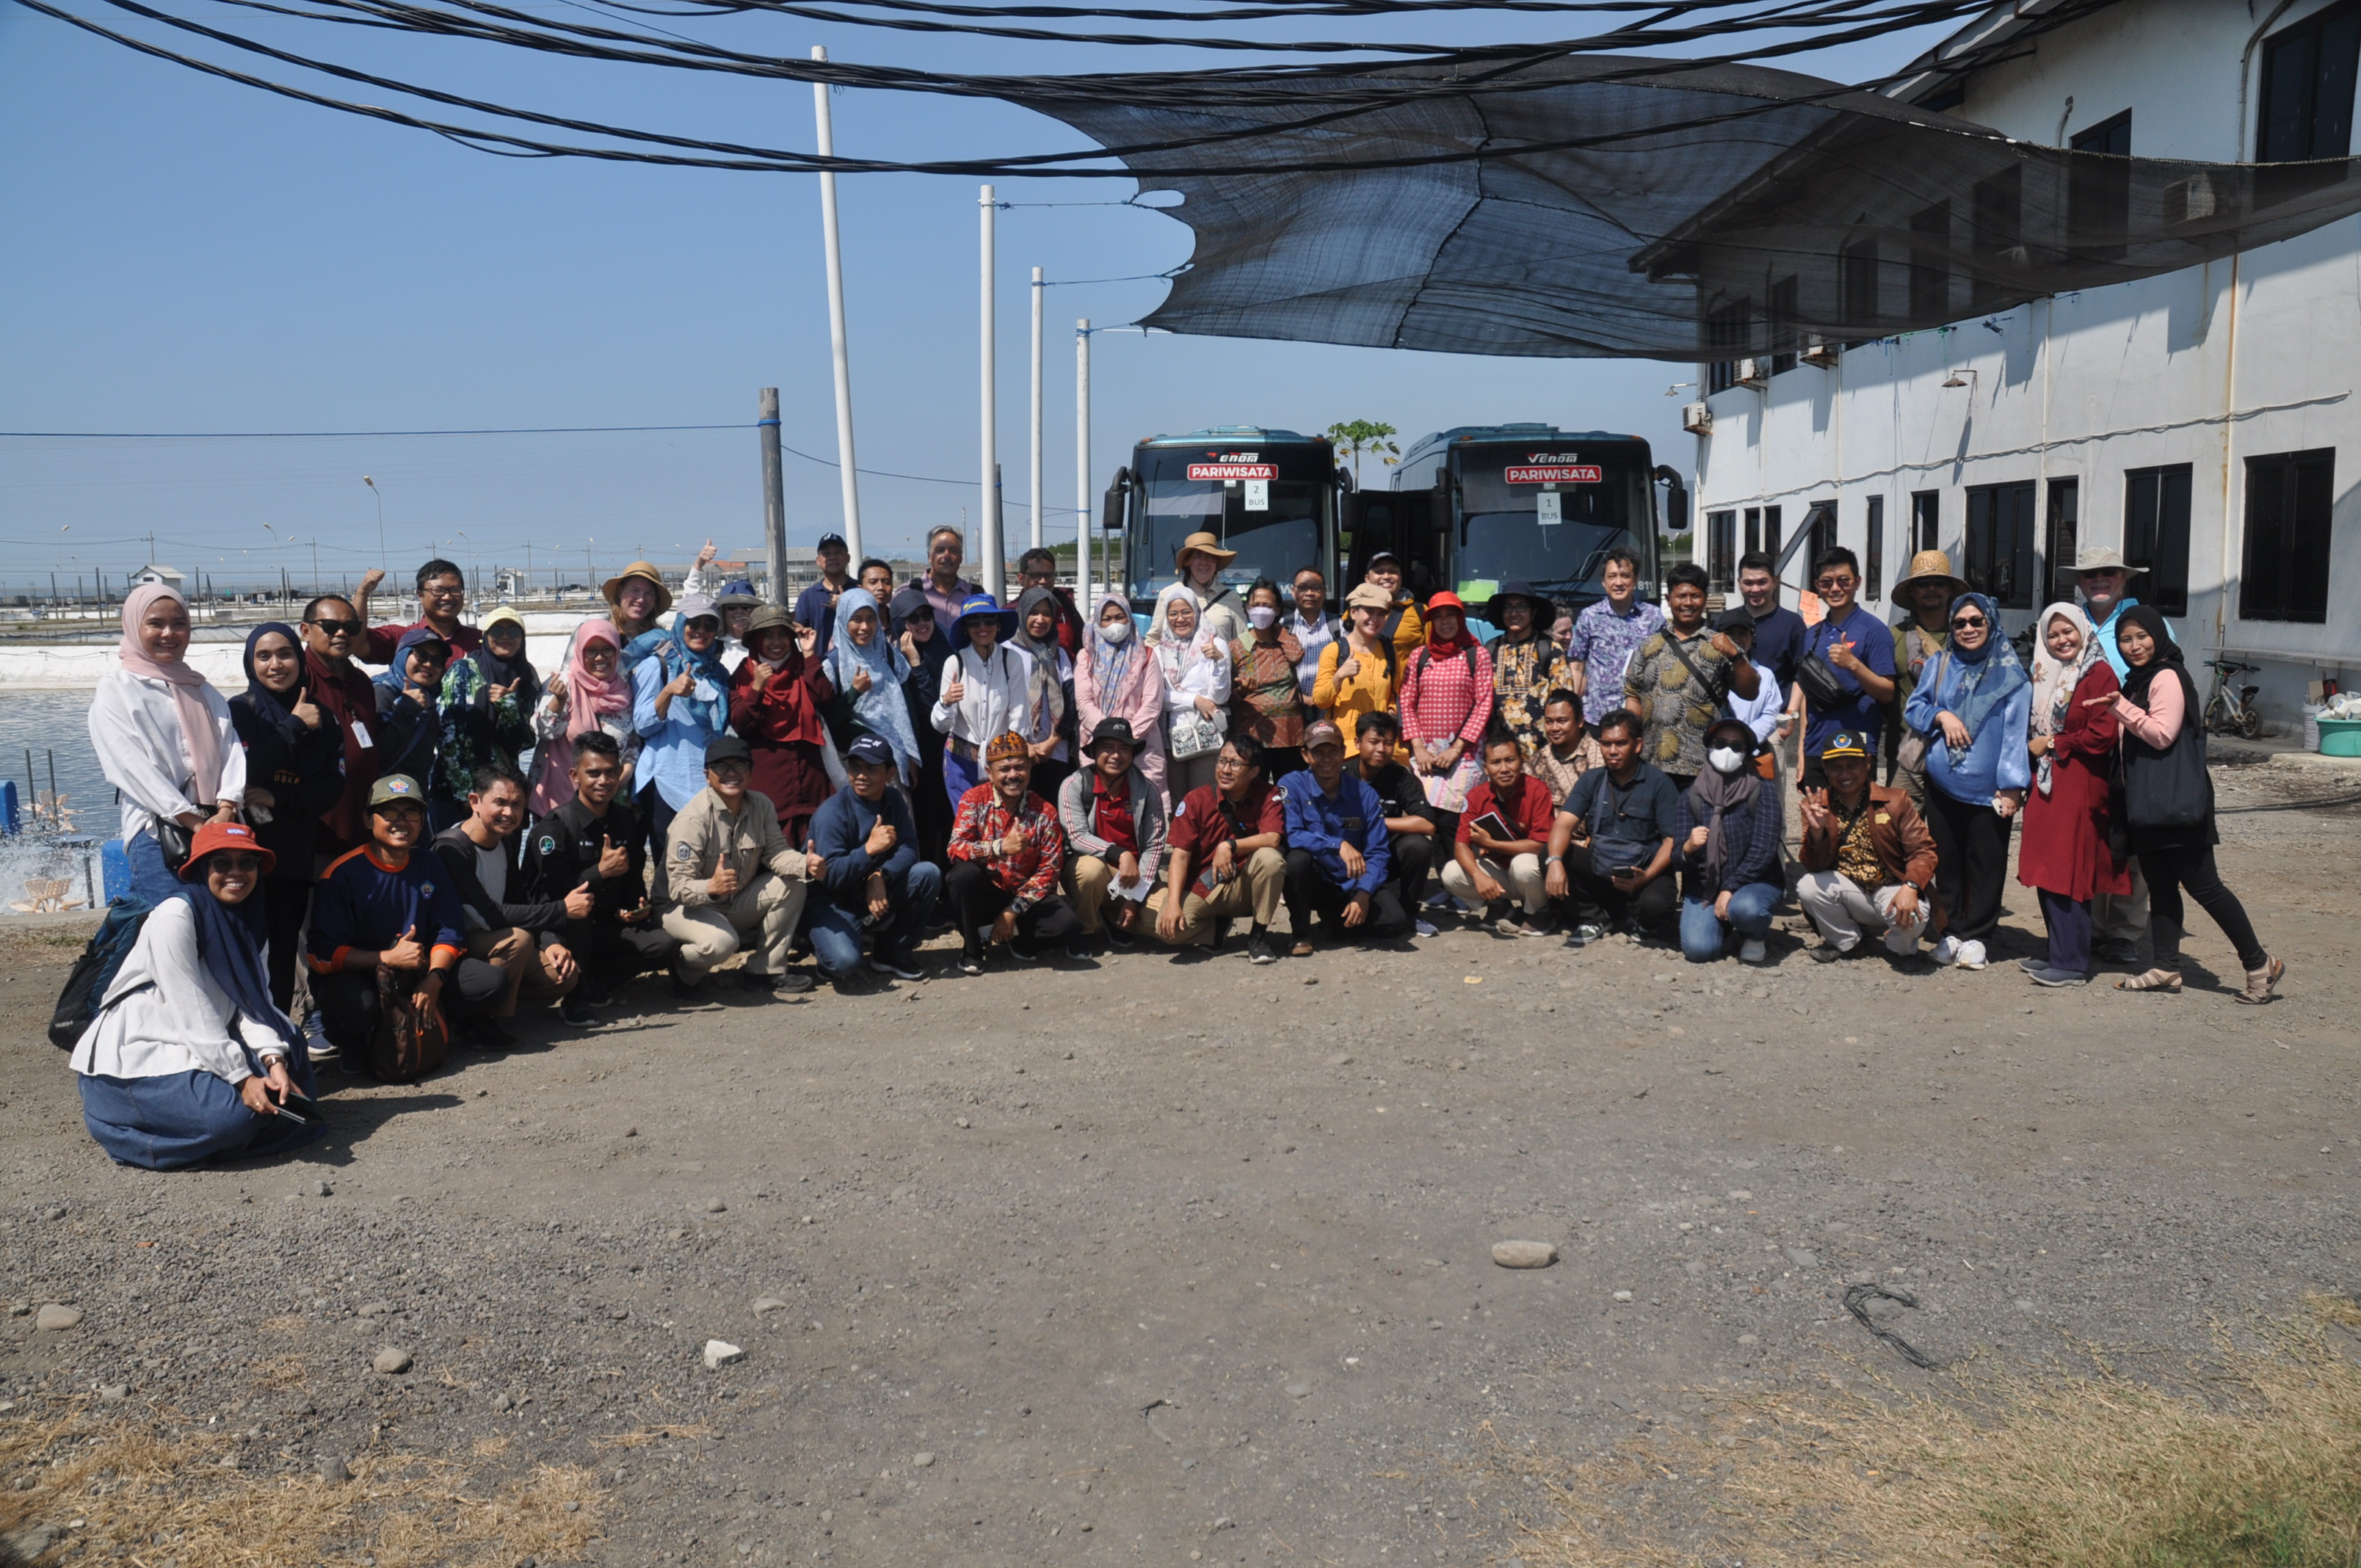 Group photo of participants in front of two tour buses, under shade netting, at the shrimp farm.